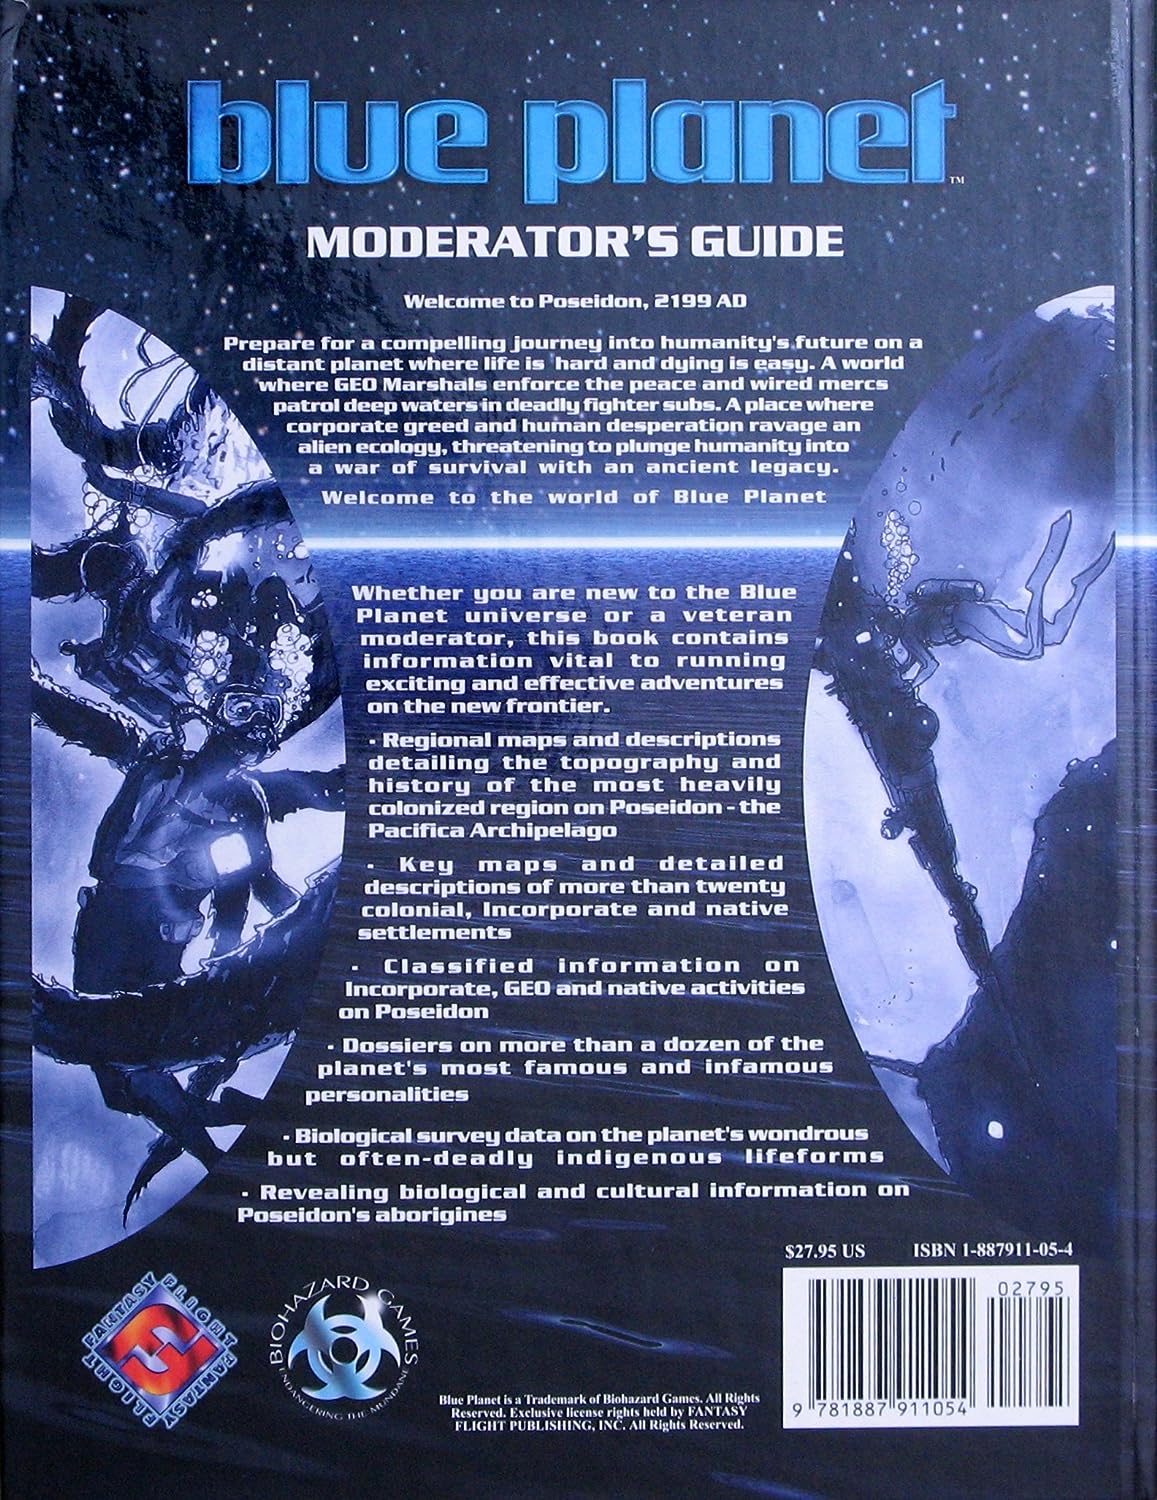 BLUE PLANET MODERATOR'S GUIDE